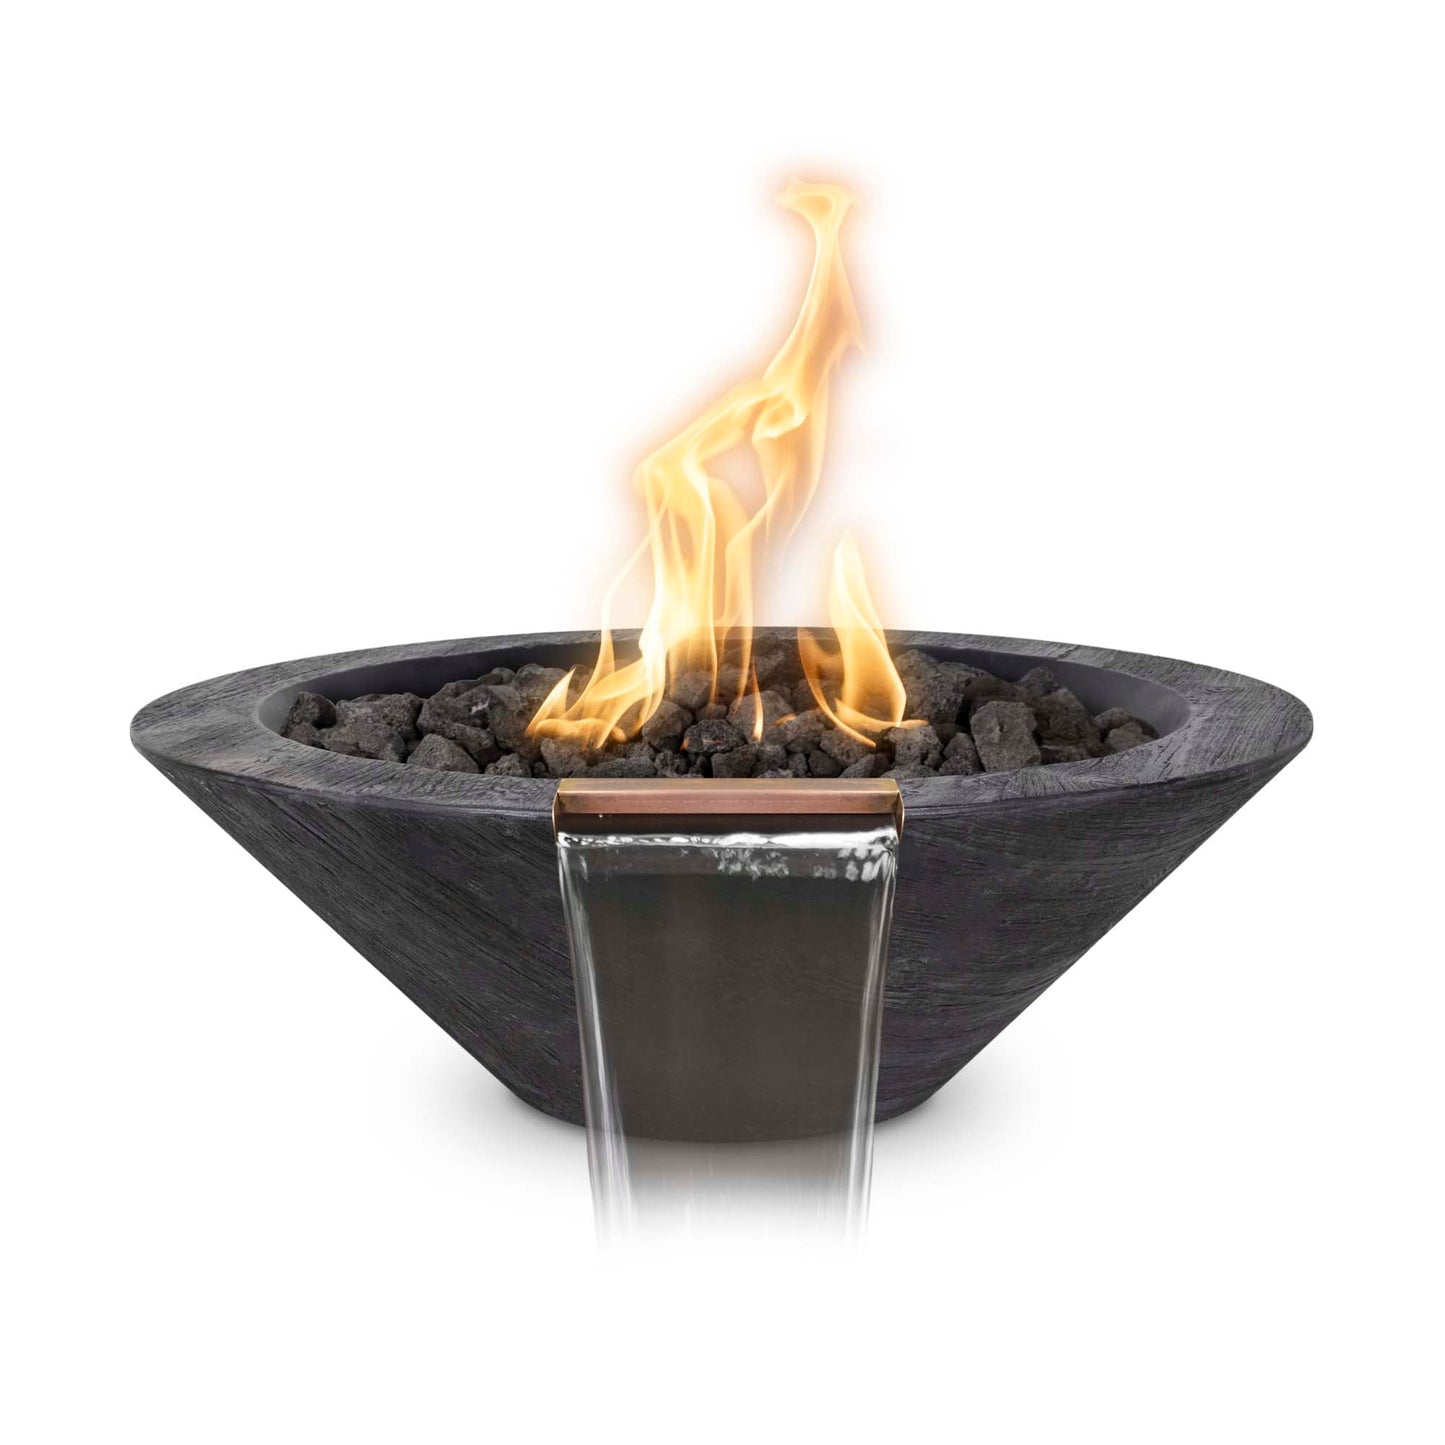 32" Cazo Wood Grain Fire and Water Bowl - 12V Electronic Ignition-Novel Home